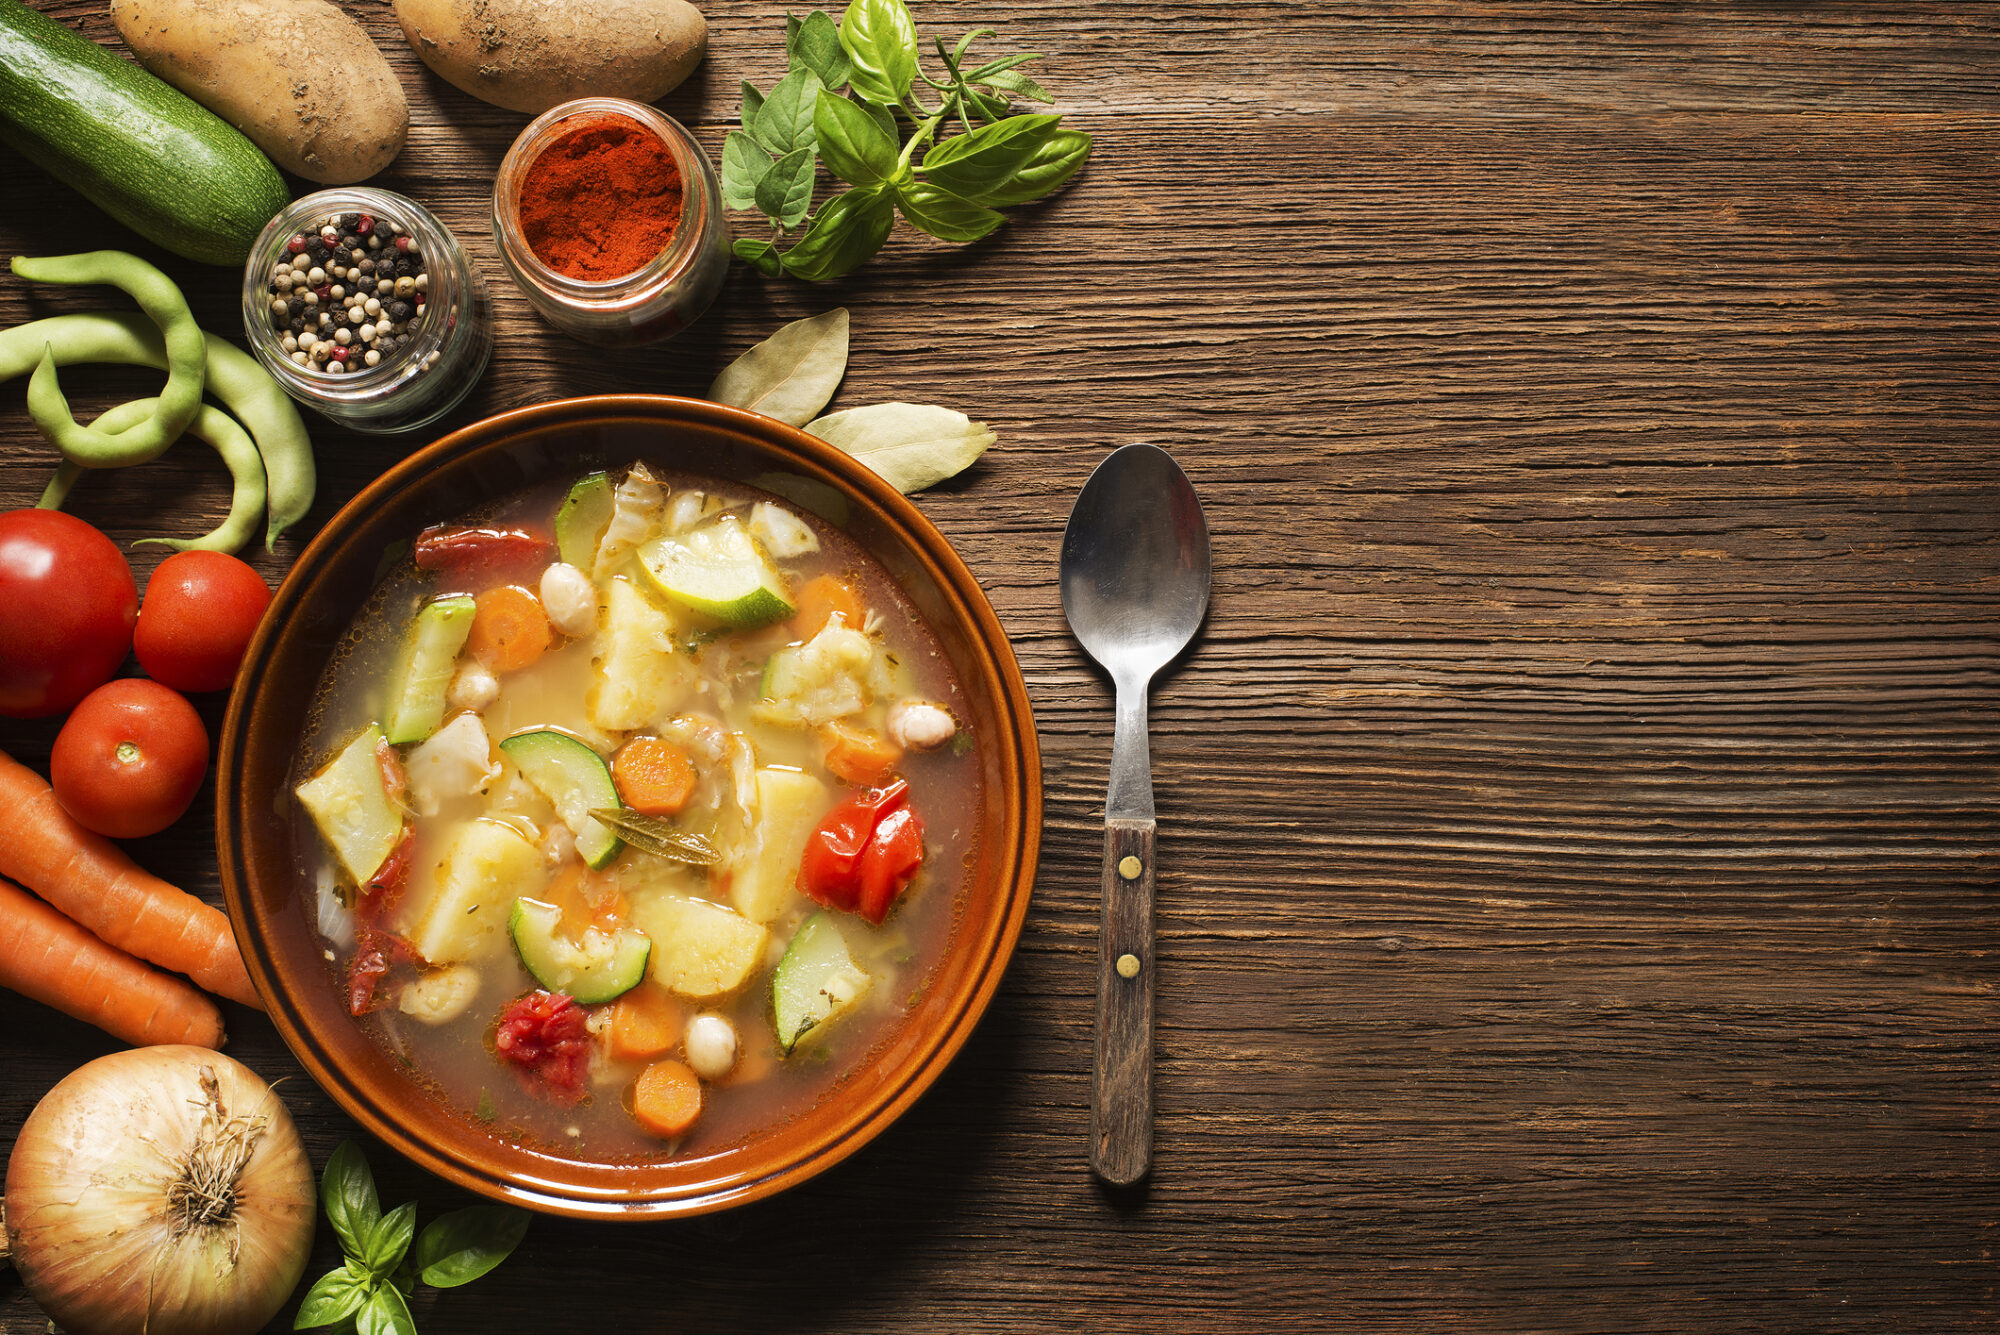 A bowl of fresh vegetable soup sits on a wooden table with the raw ingredients arrayed to one side.